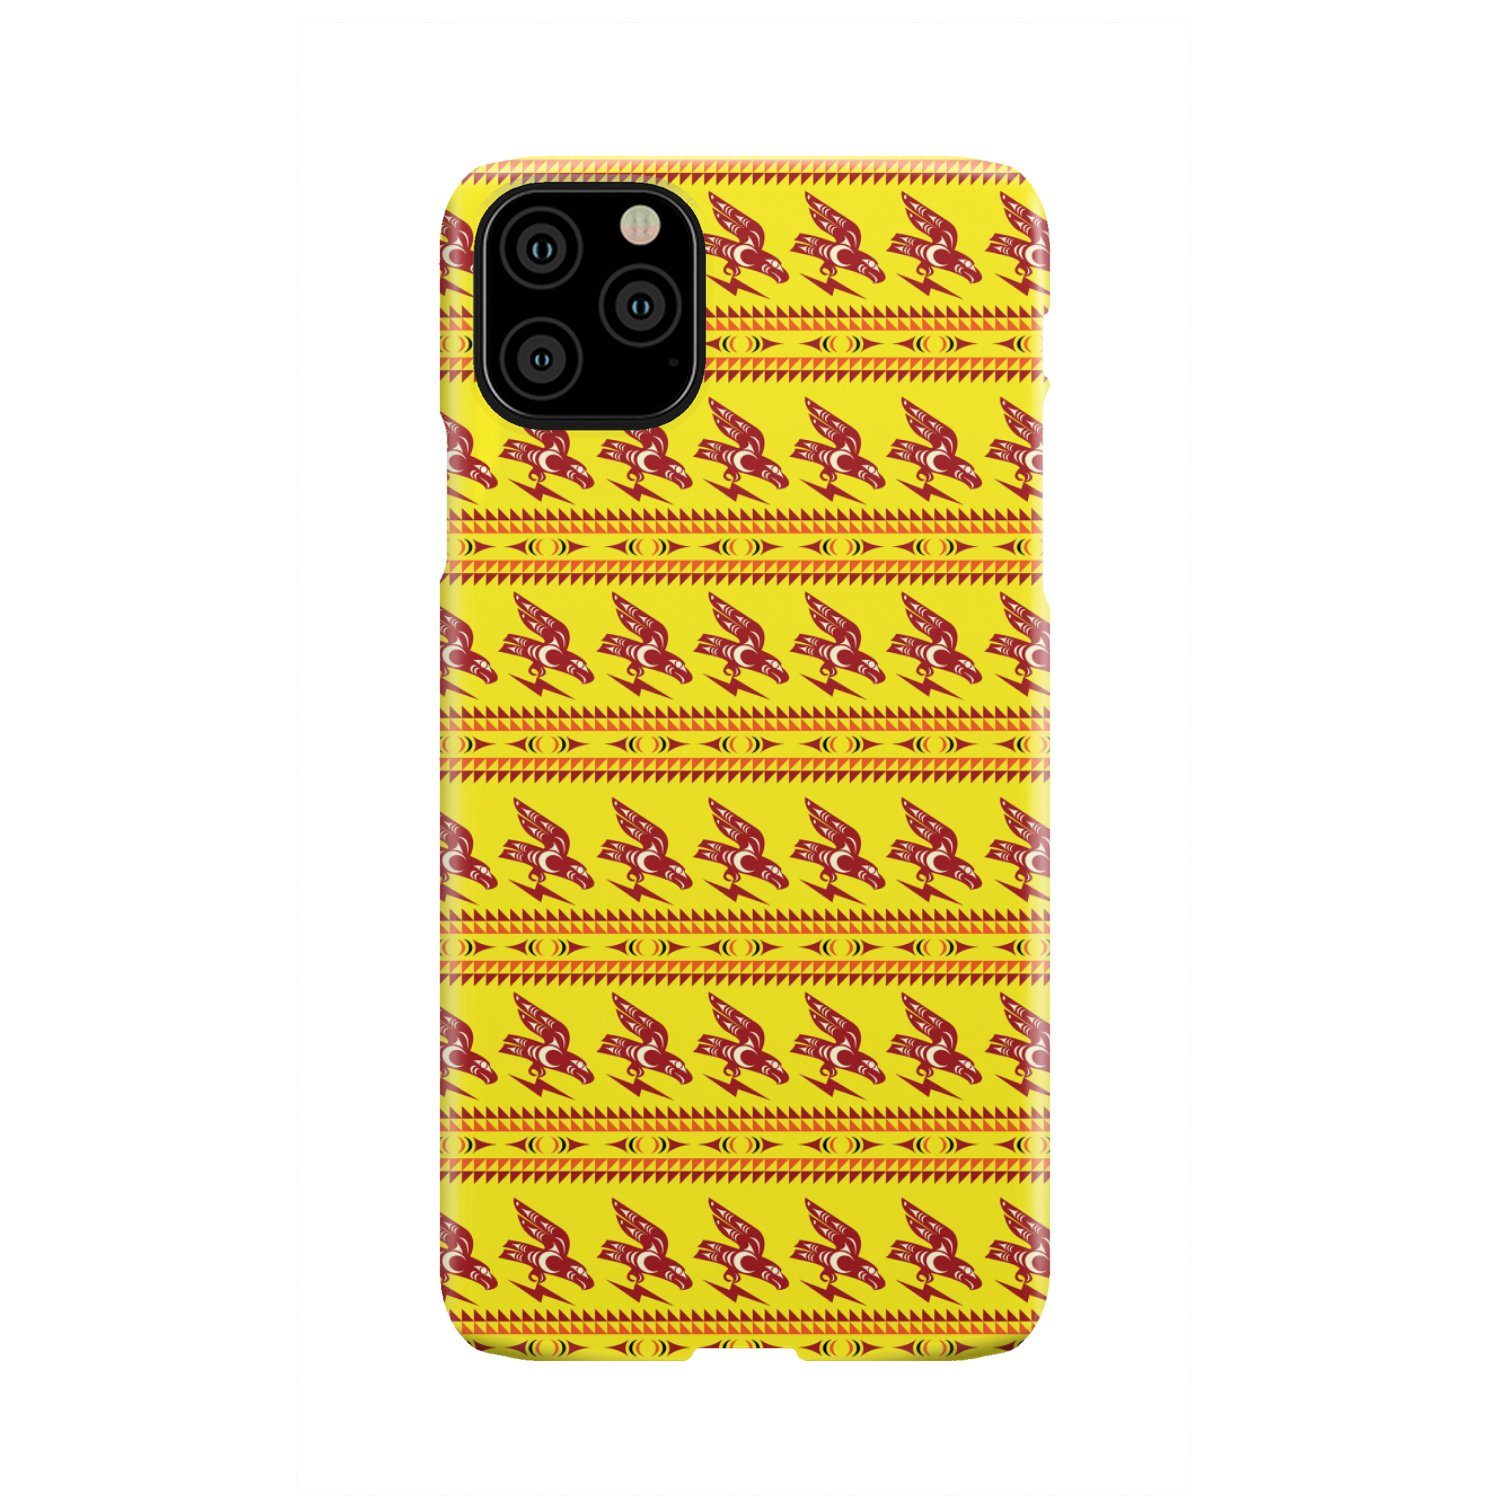 Ovila Mailhot Design : Eagle Brings Good Vibes Yellow Phone Case Phone Case wc-fulfillment iPhone 11 Pro Max 